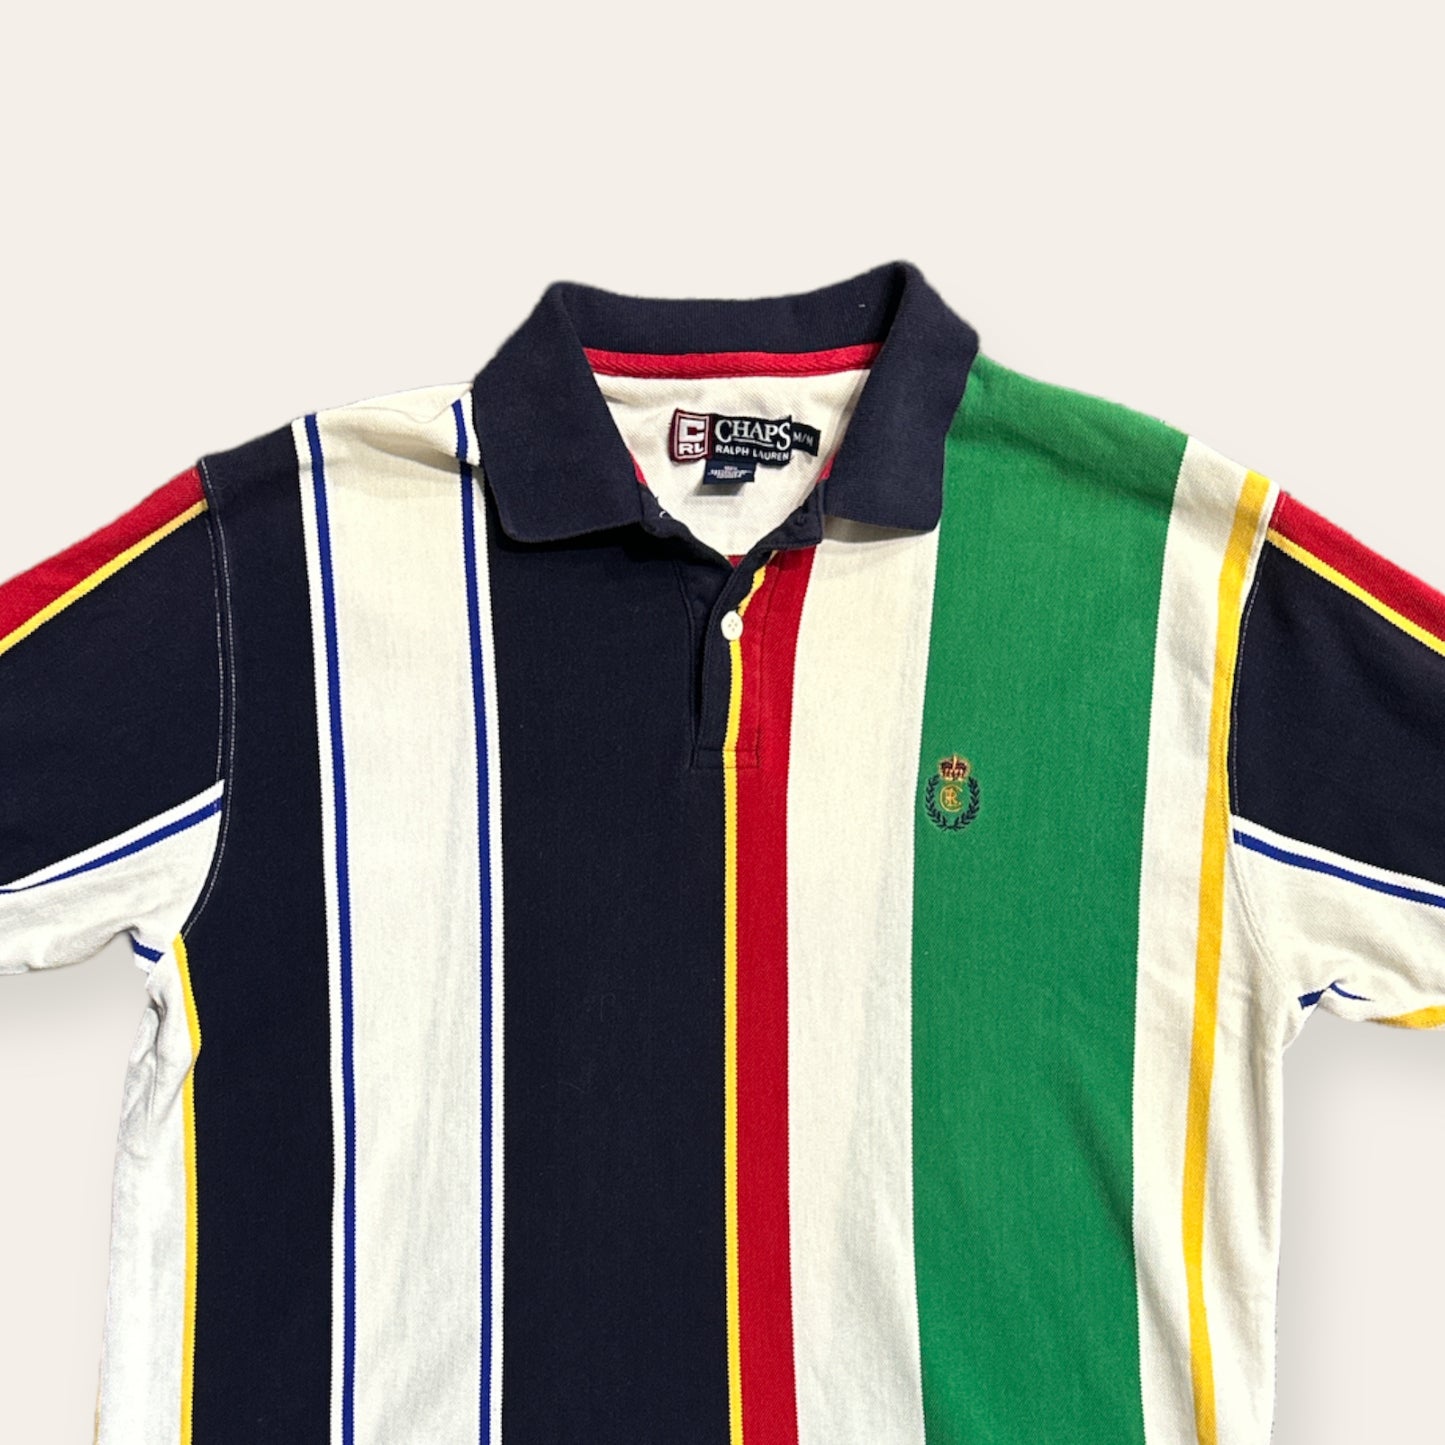 Chaps by Ralph Lauren Polo Tee Size M